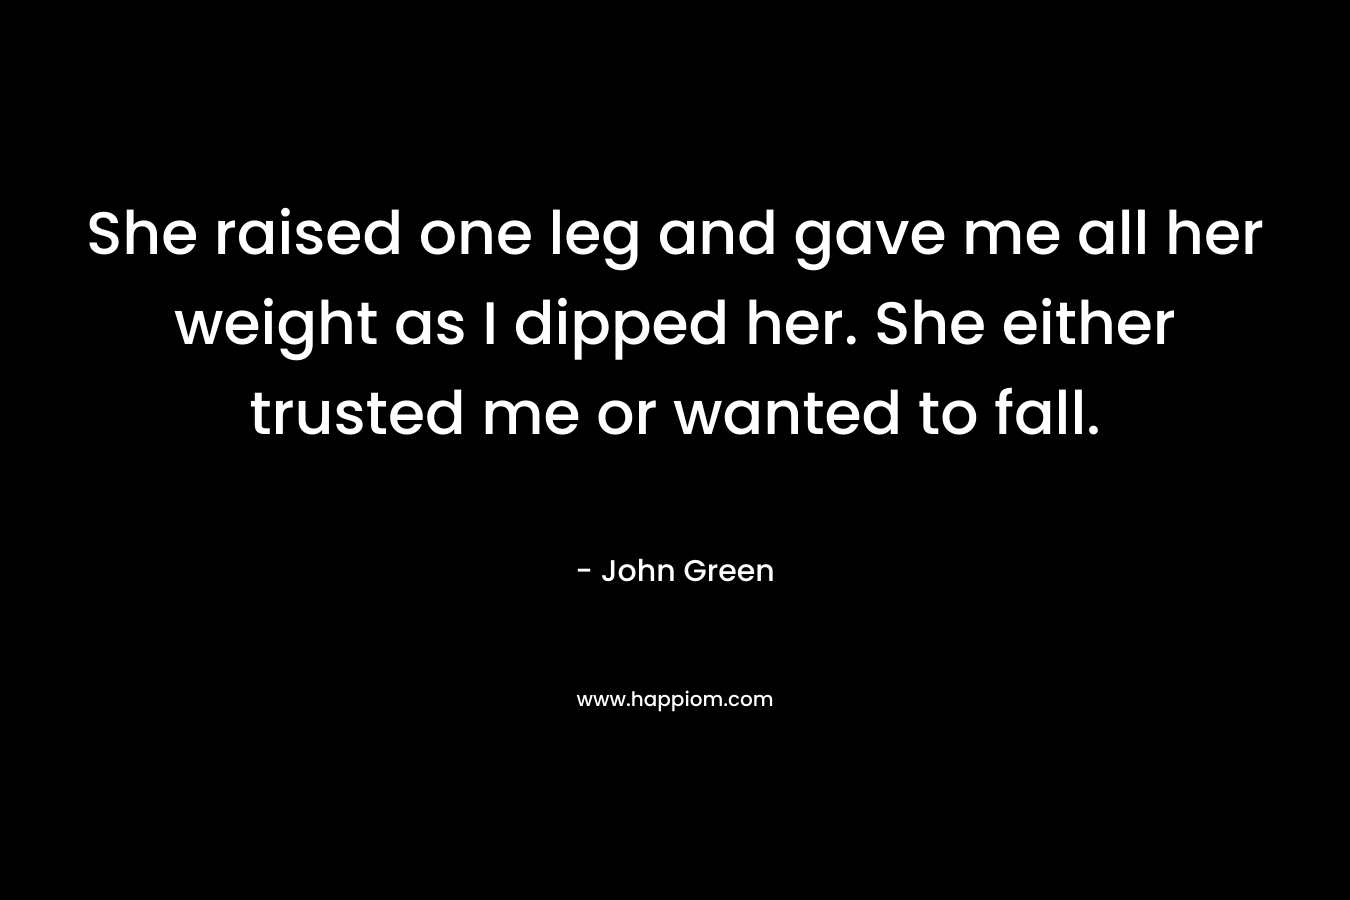 She raised one leg and gave me all her weight as I dipped her. She either trusted me or wanted to fall. – John Green